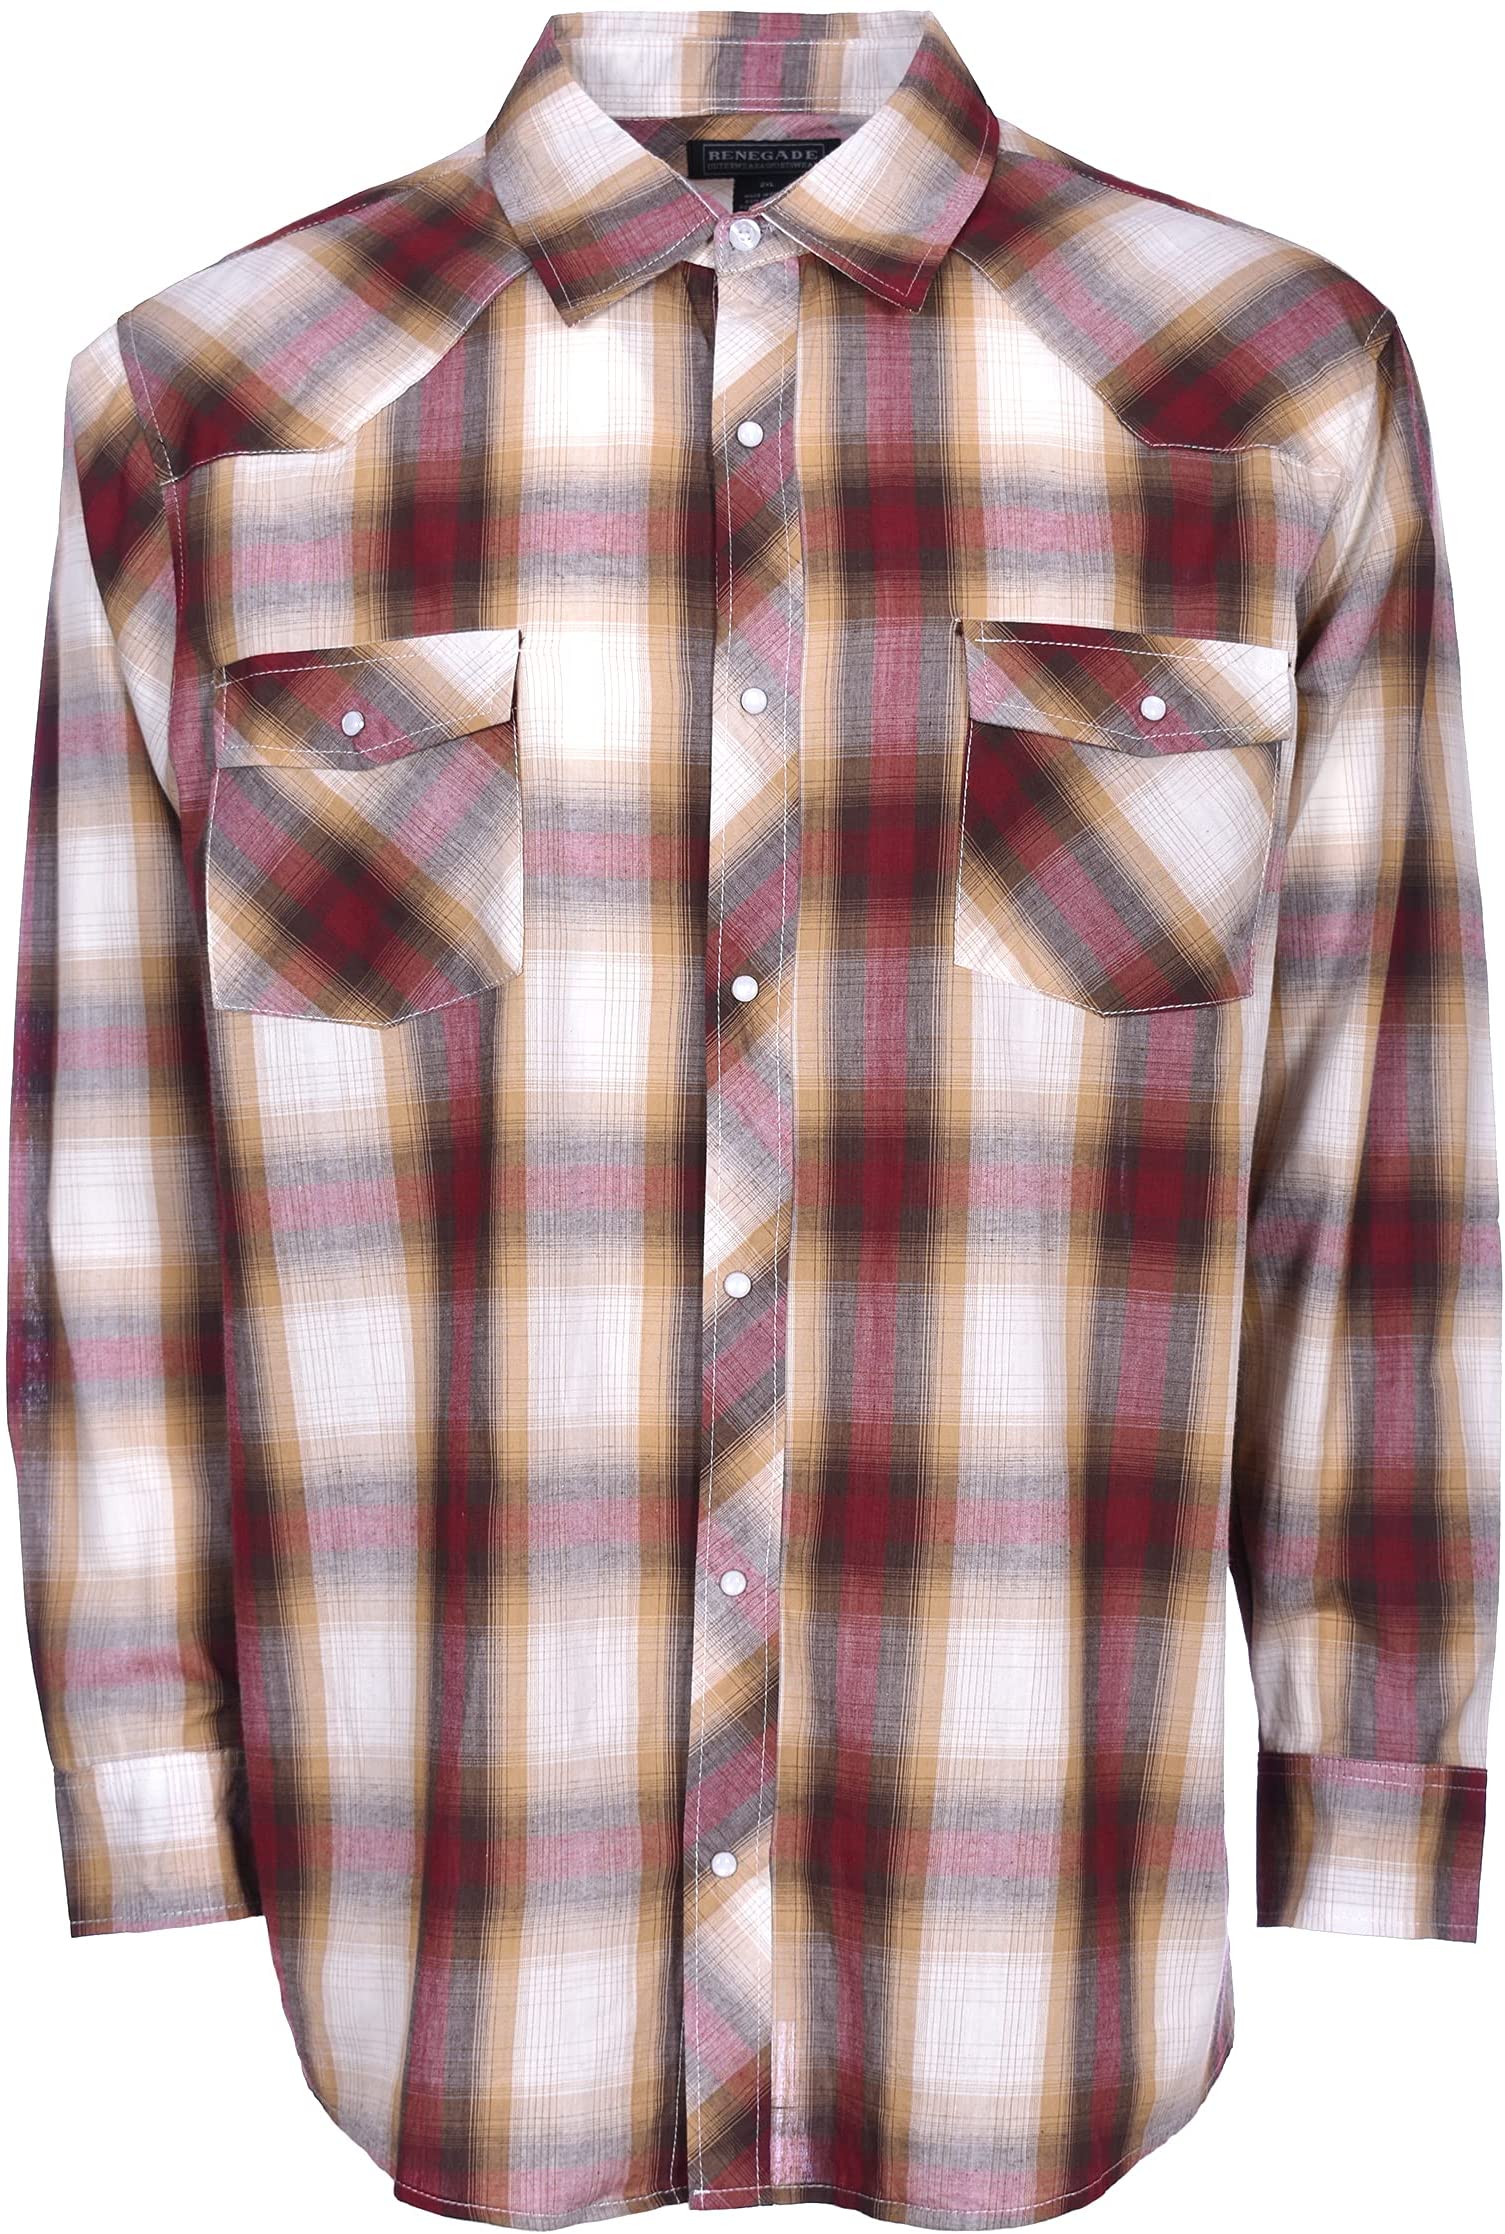 Men's Long Sleeve Button Down Western Shirts Plaid with Pearl Snaps Medium  to 5X 